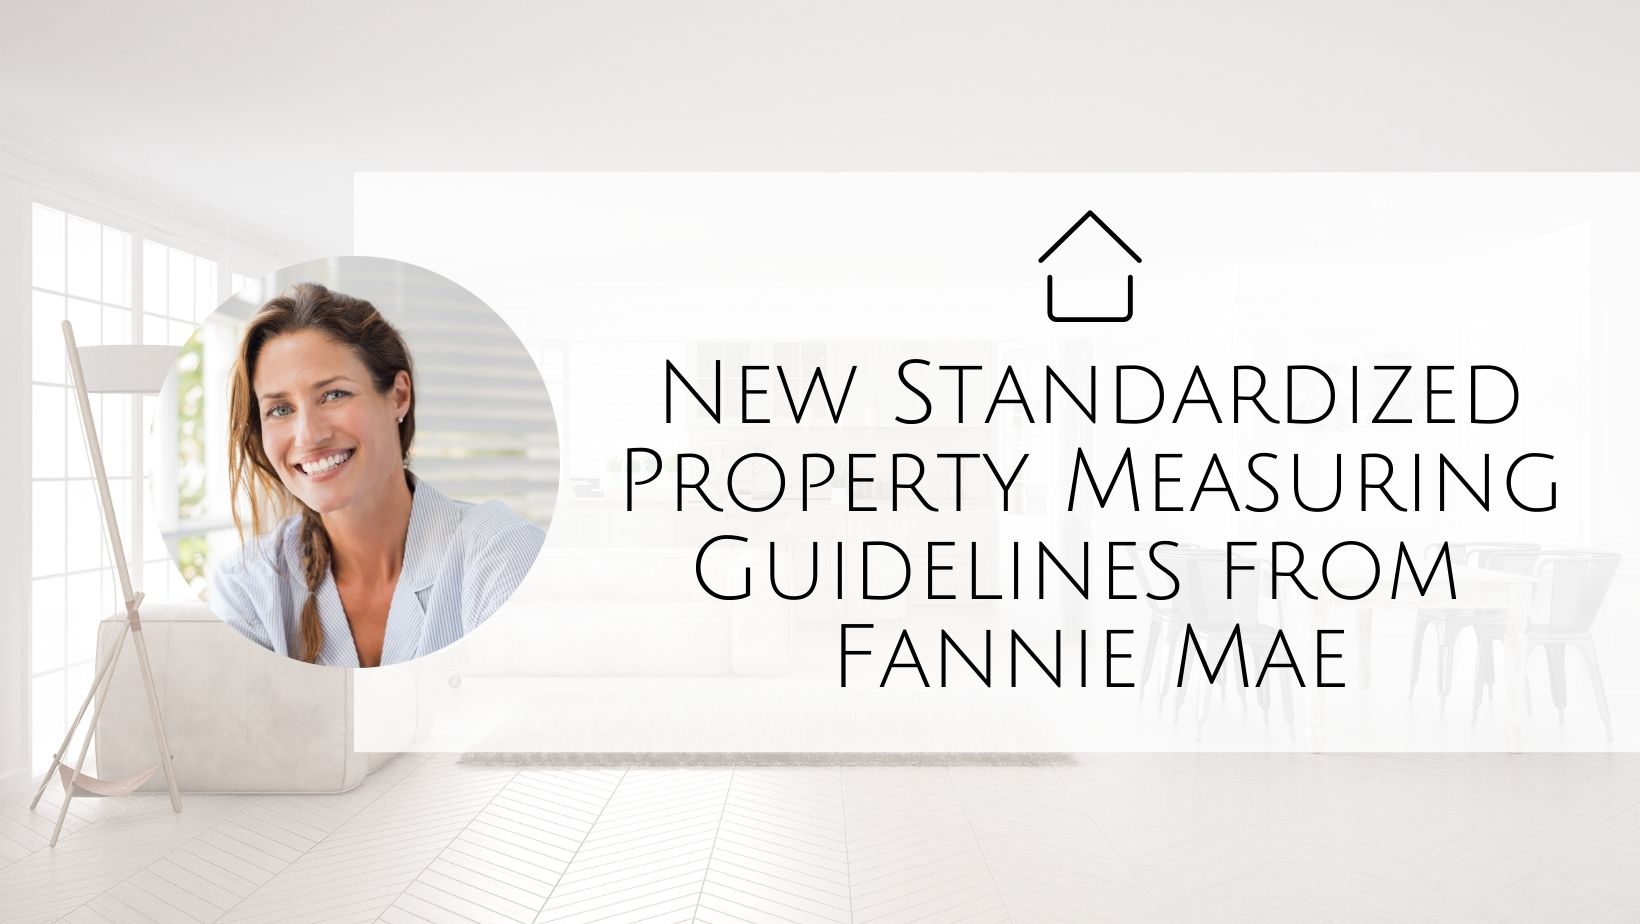 New Standardized Property Measuring Guidelines from Fannie Mae